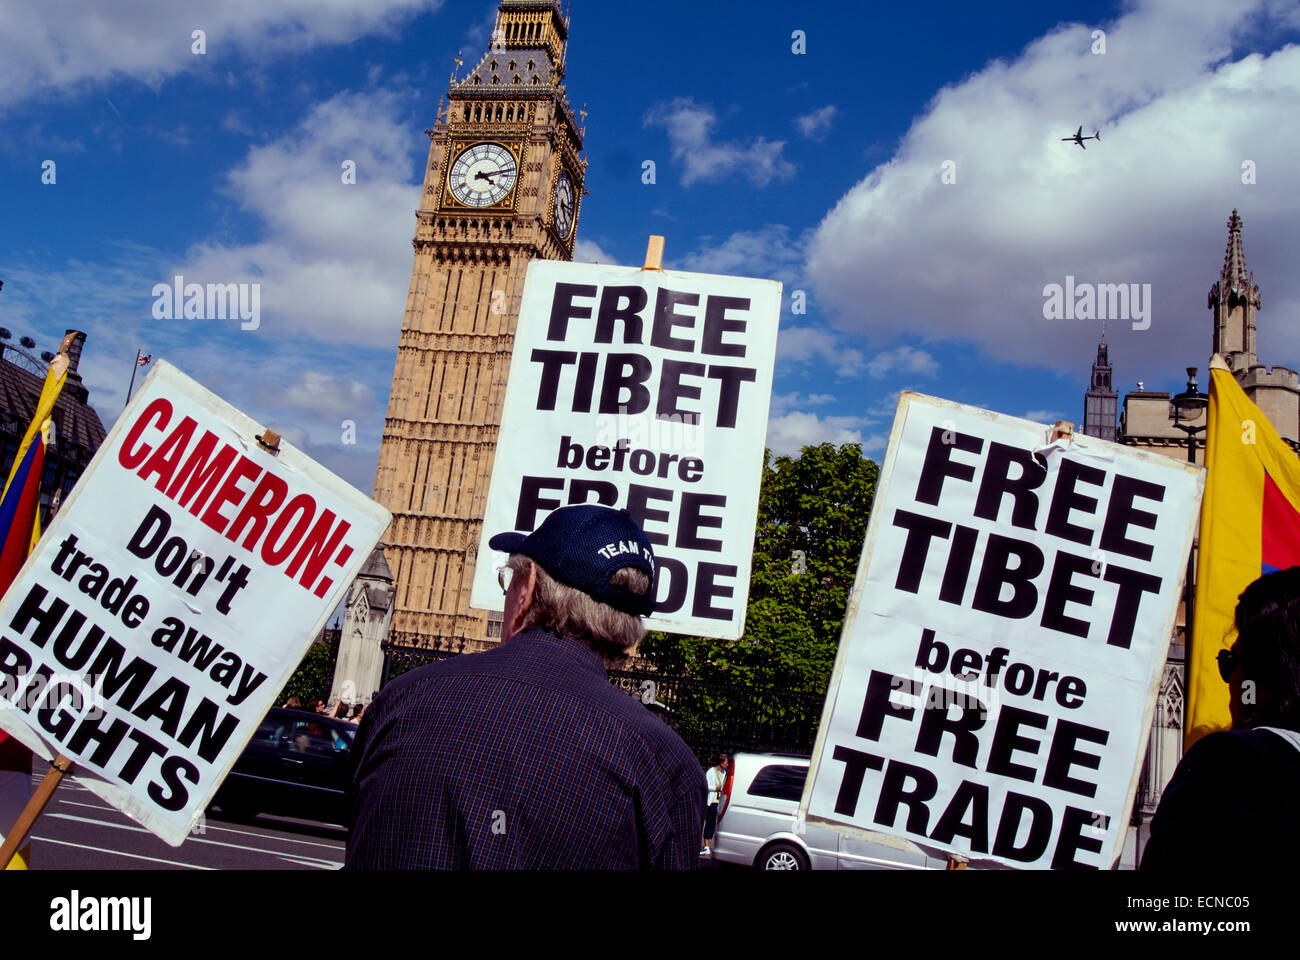 Protesters in front of UK parliament in London England Holding placards . Free Tibet protest in front of Big Ben Stock Photo